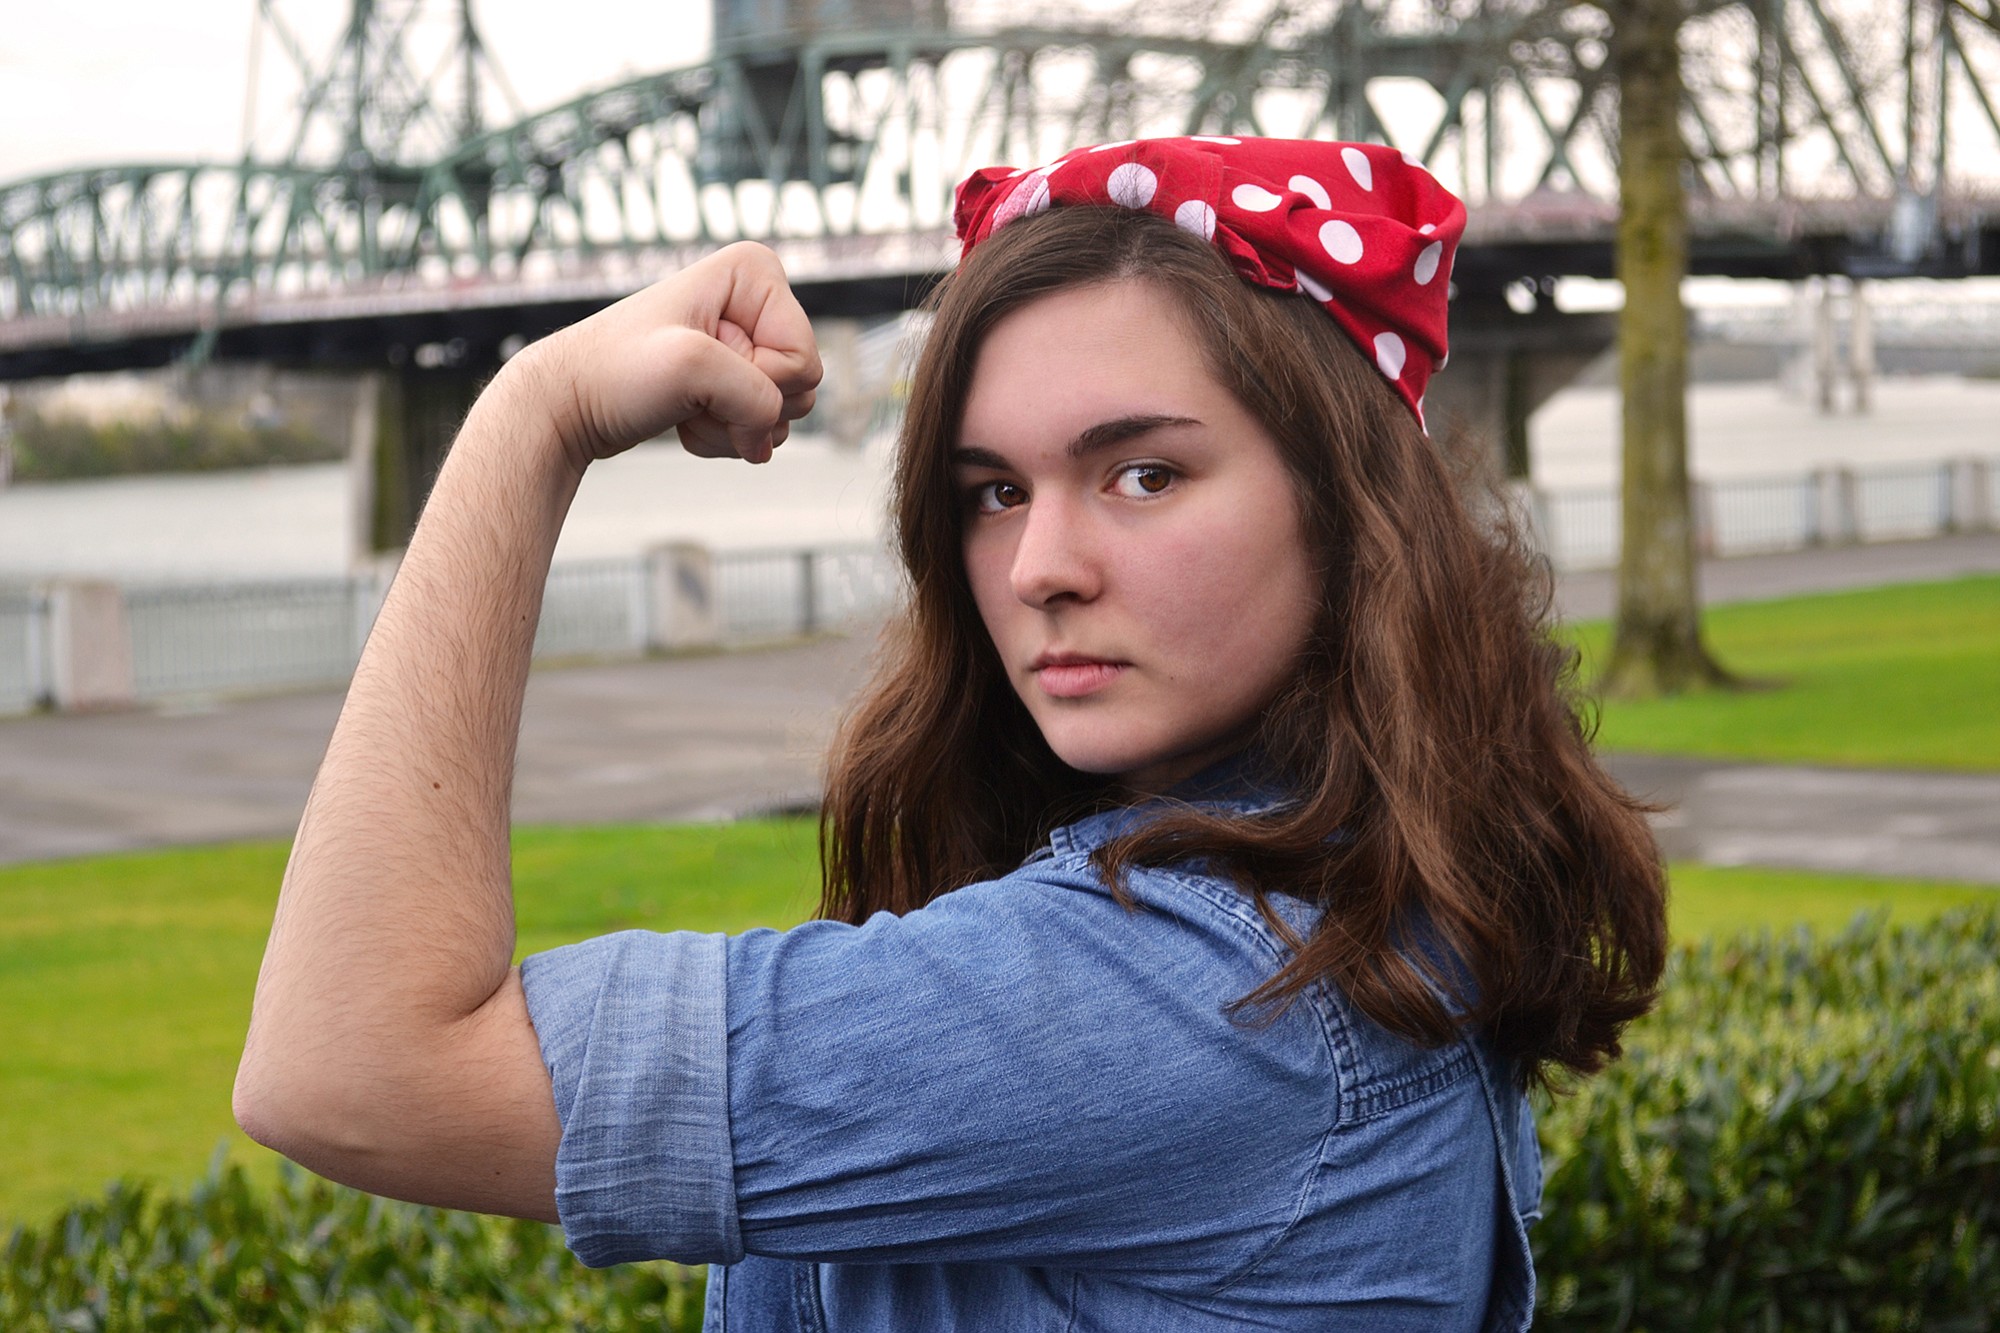 Adeena Wade of Battle Ground as fictitious character Rose Wade, one of the many Rosie the Riveters who helped win World War II.